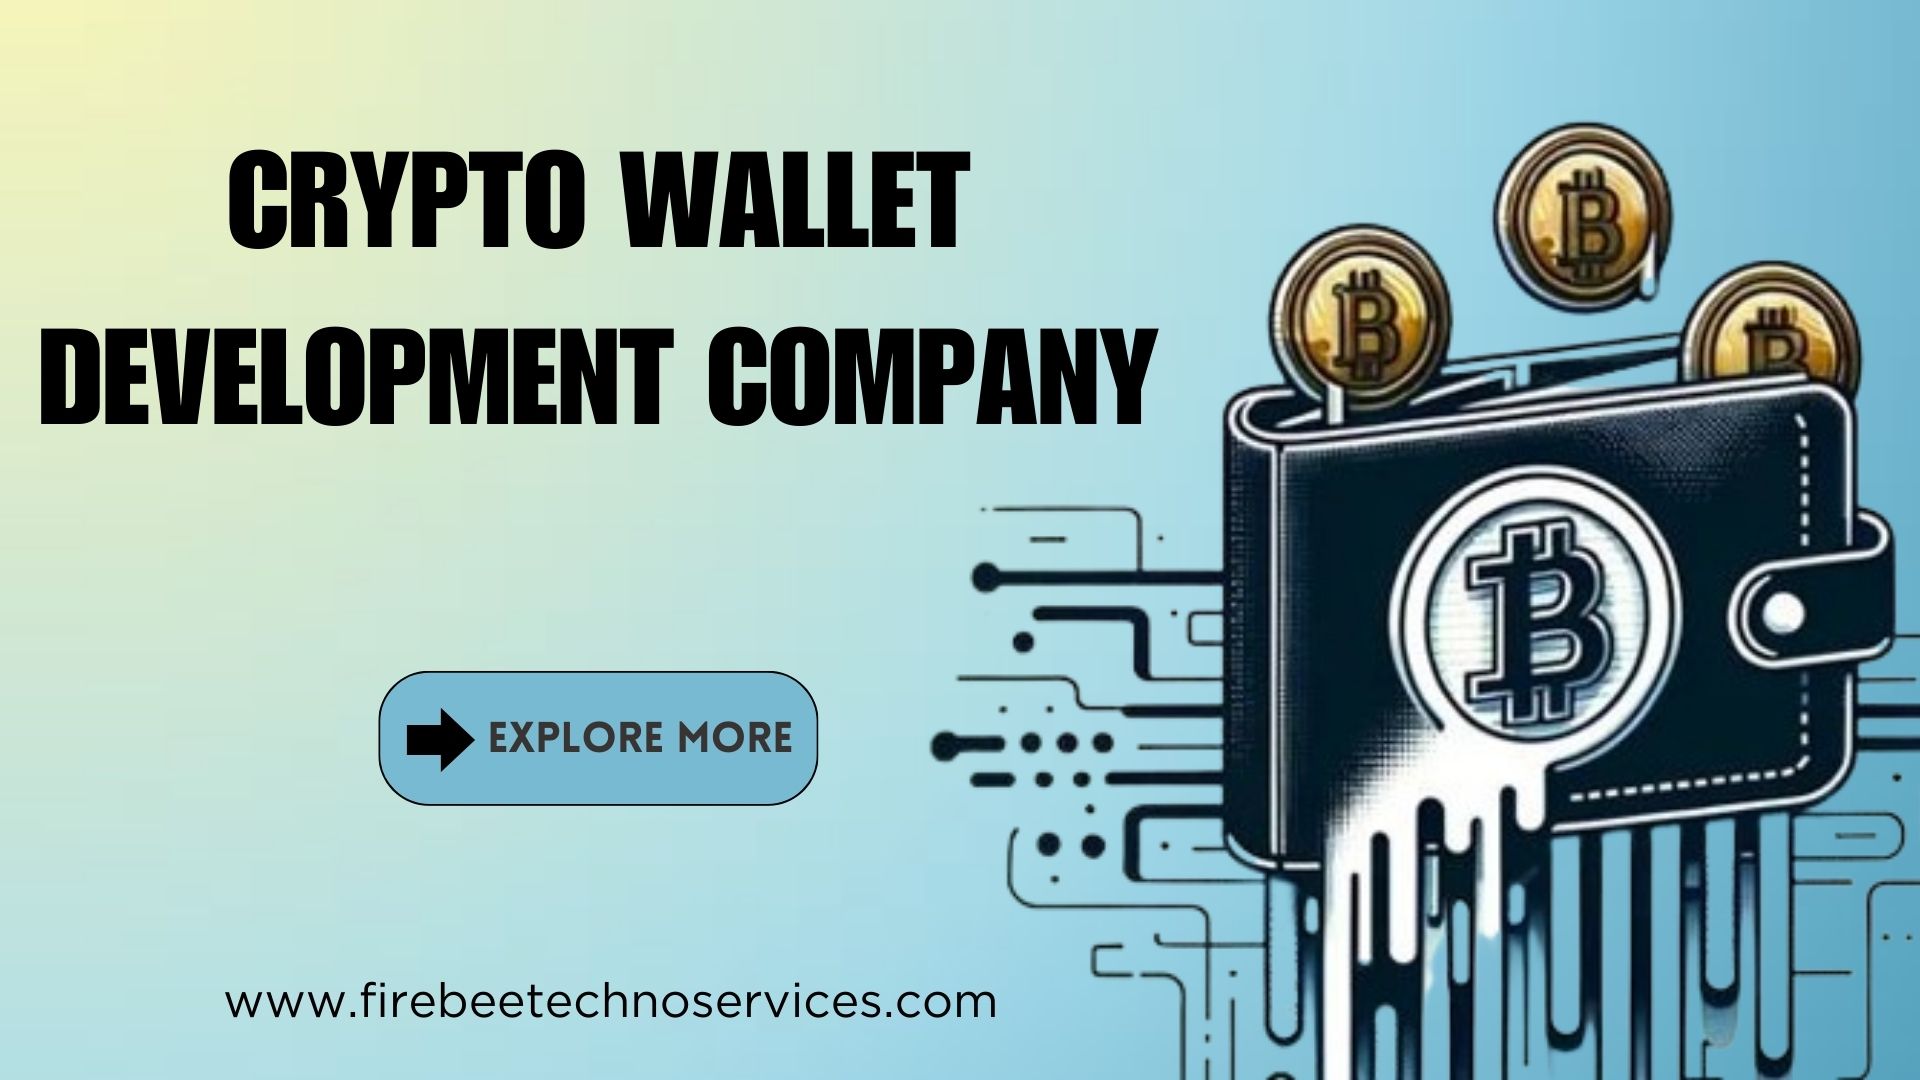 Innovative Company Pioneering the Development of Crypto Wallets,United States,Services,Free Classifieds,Post Free Ads,77traders.com